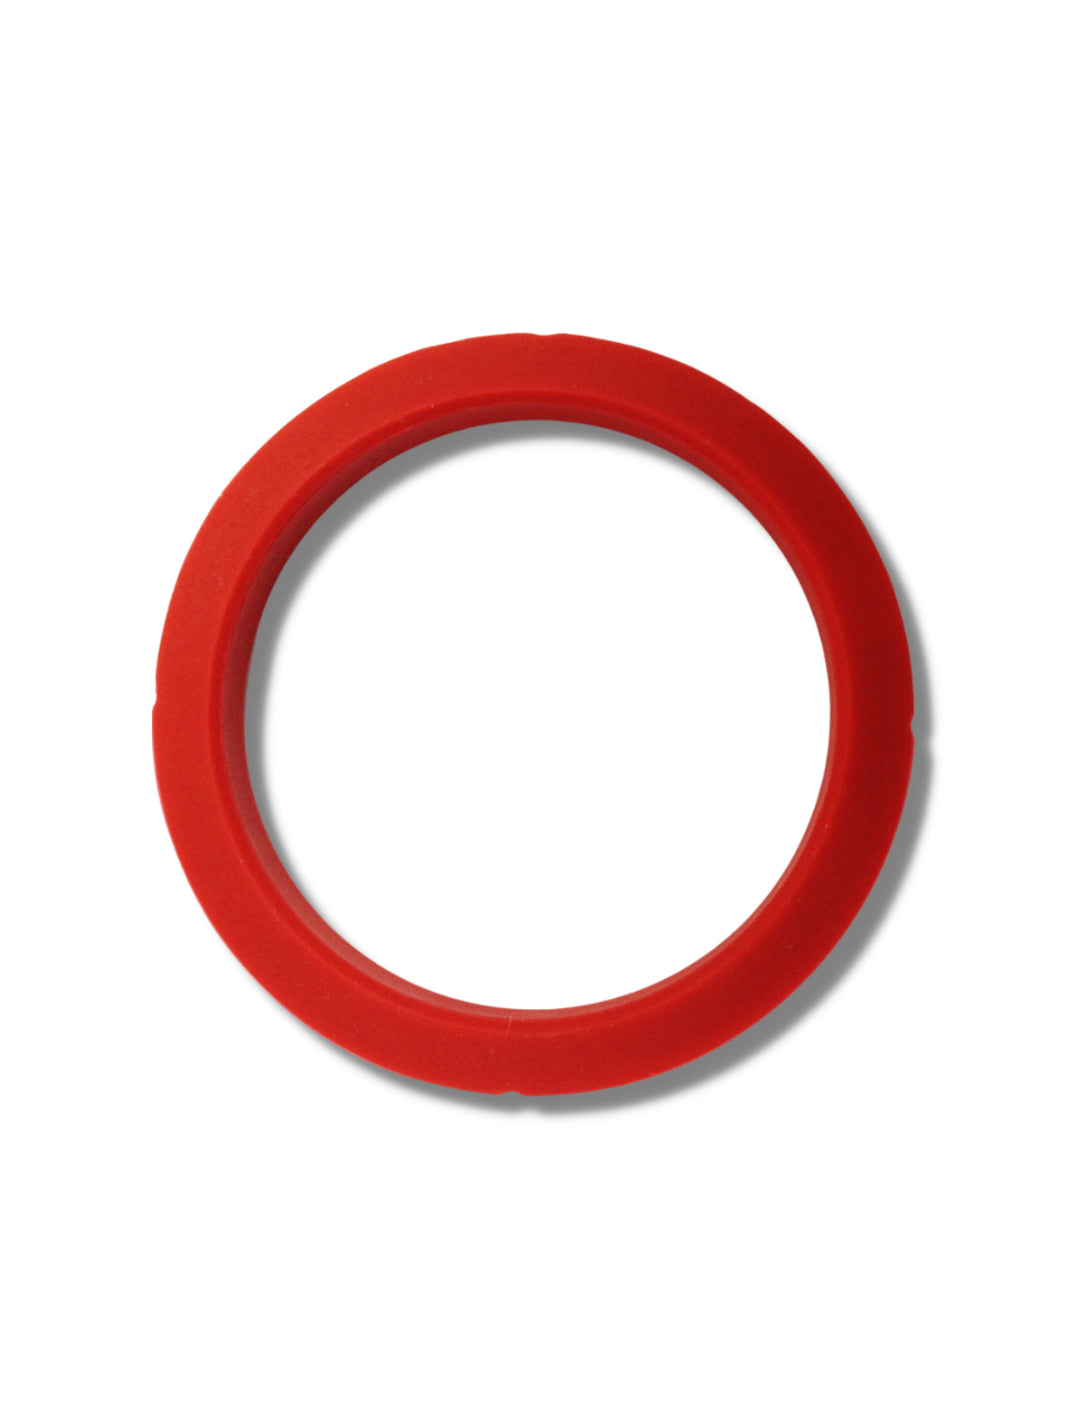 CAFELAT Silicone Group Gasket for Nuova Simonelli (8.3mm)